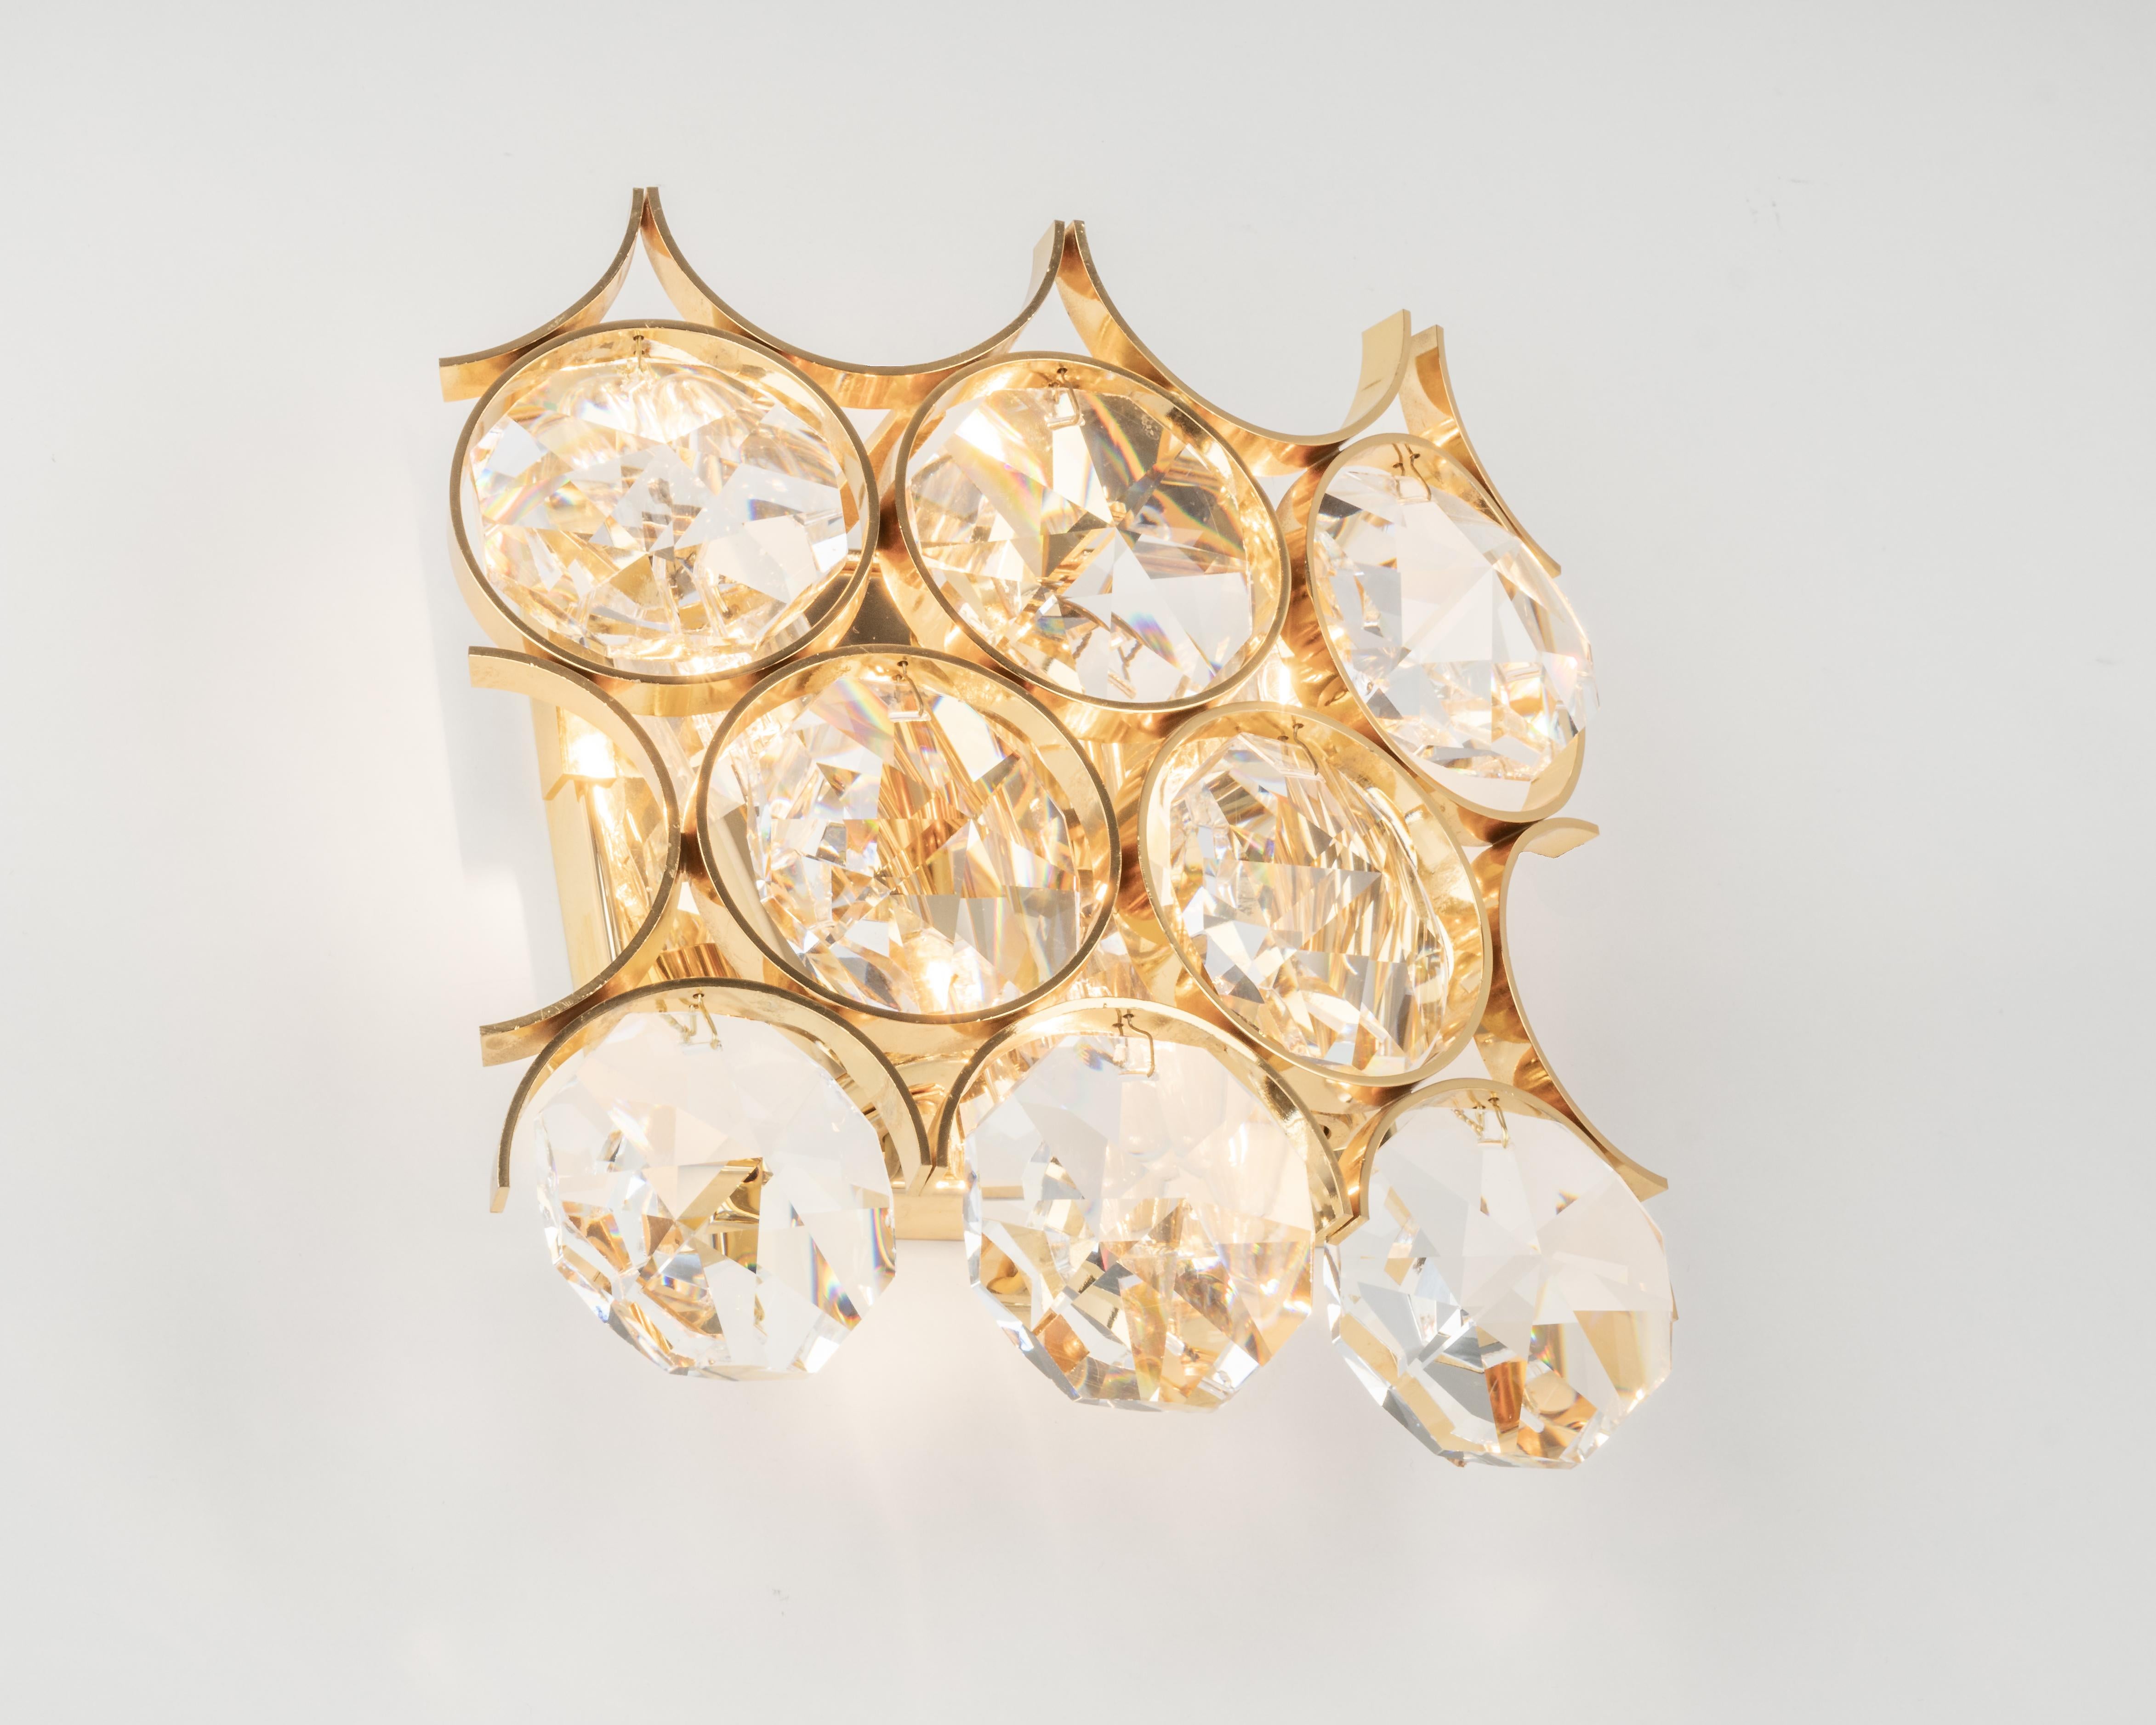 1 of 2 Pairs of Crystal Wall Lights, Sciolari Design, Palwa, Germany, 1960s For Sale 2